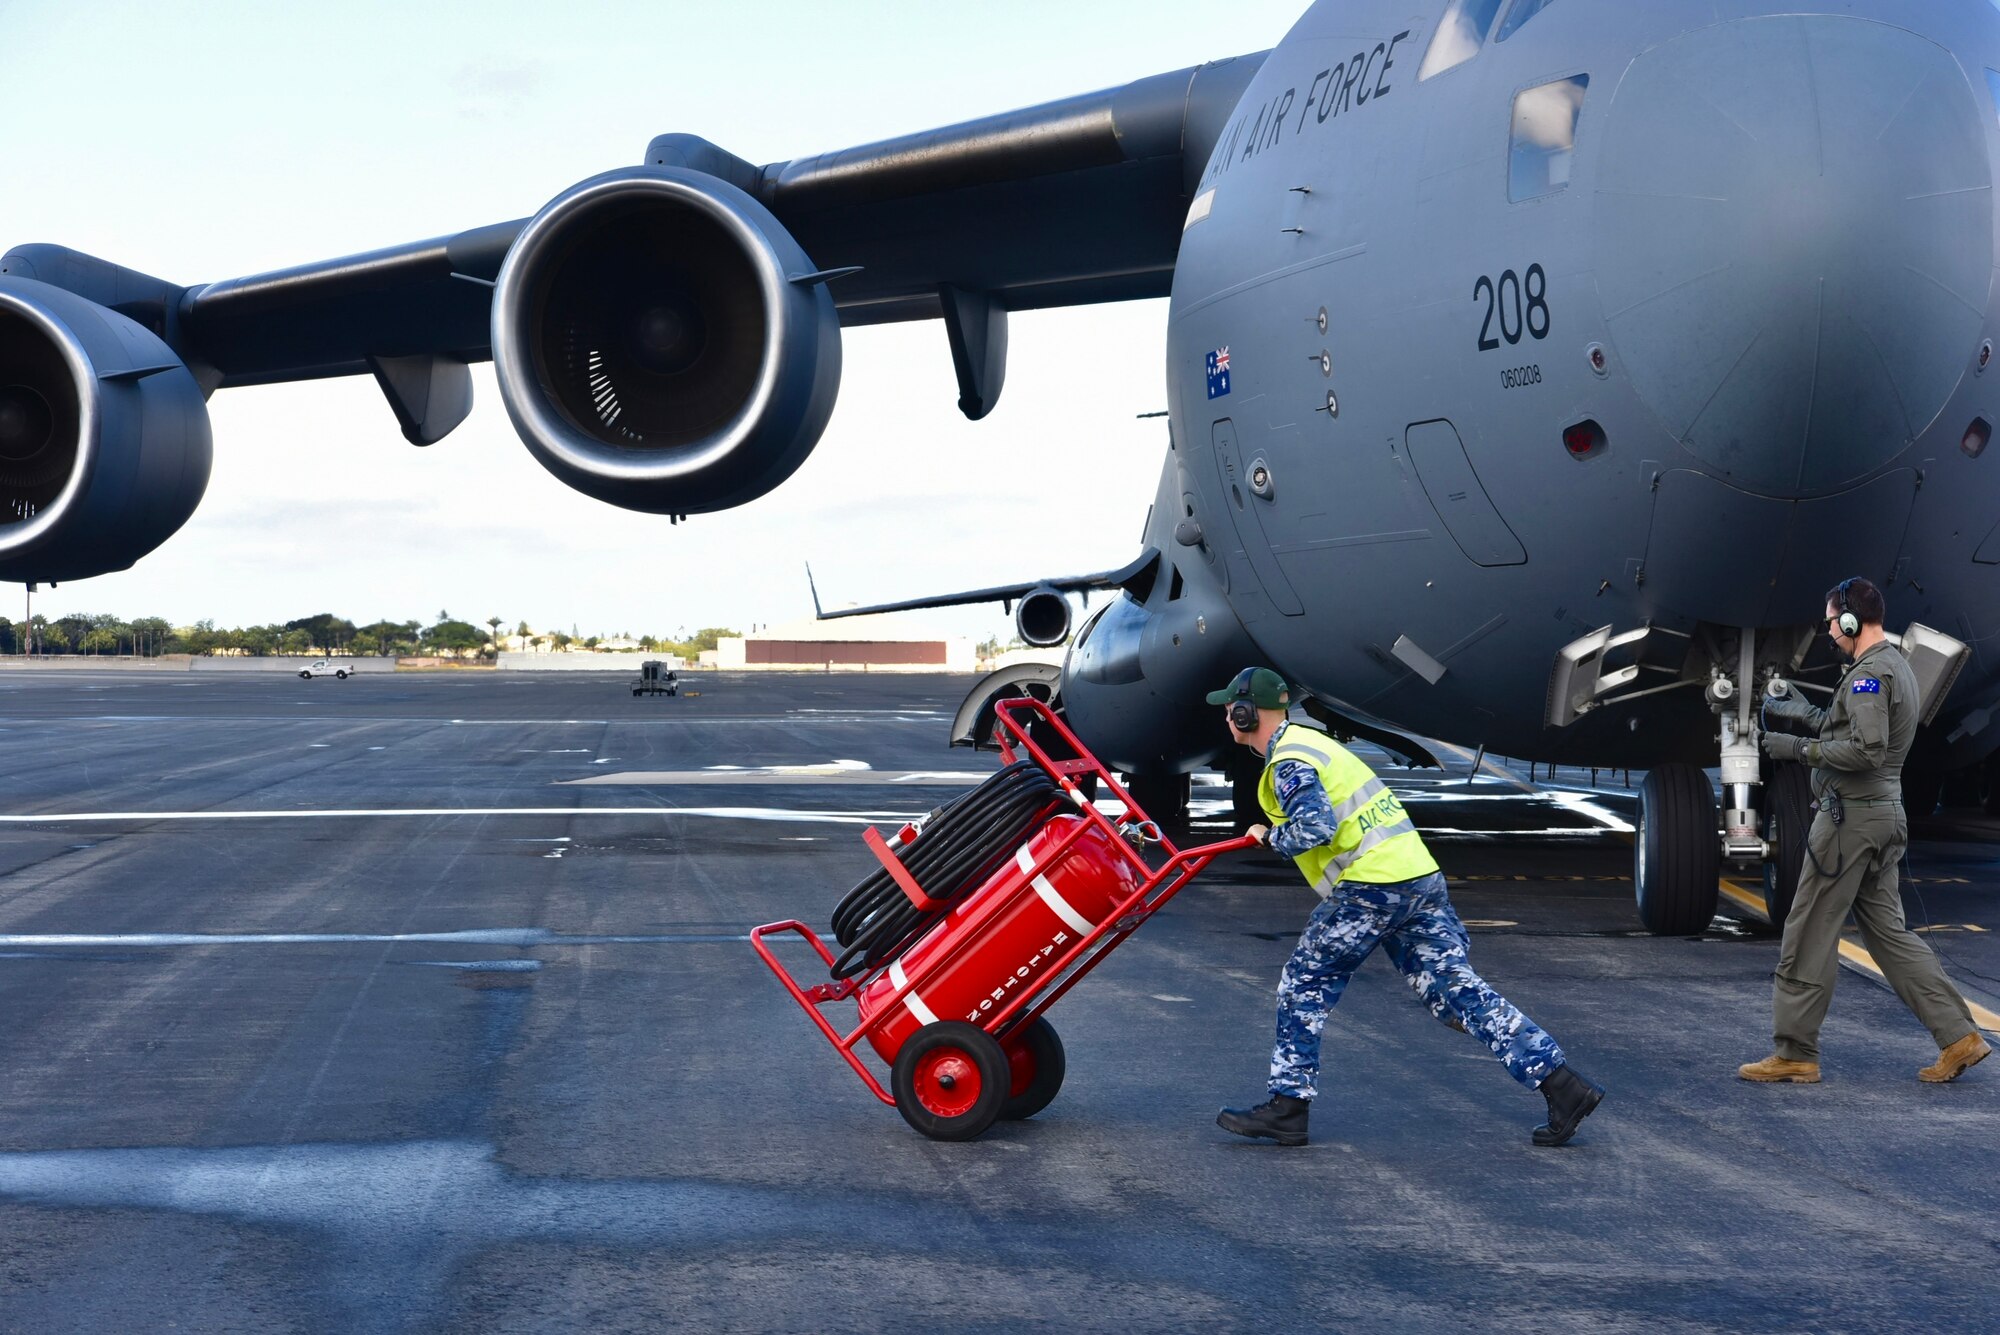 Royal Australian Air Force Leading Aircraftman Luke McAndrew, No. 36 Squadron aircraft technician, removes the flight line fire extinguisher while RAF Corporal Grant Vaughan, No. 36 Squadron loadmaster, finishes a pre-flight inspection before taking off for the first training mission of Exercise Global Dexterity 2022 at Joint Base Pearl Harbor-Hickam, Hawaii, May 3, 2022. The 15th Wing hosted the RAF as part of Exercise Global Dexterity 2022, where U.S. and Australian C-17s and aircrew can train and fly side-by-side to learn from each other. (U.S. Air Force photo by 1st Lt. Benjamin Aronson)